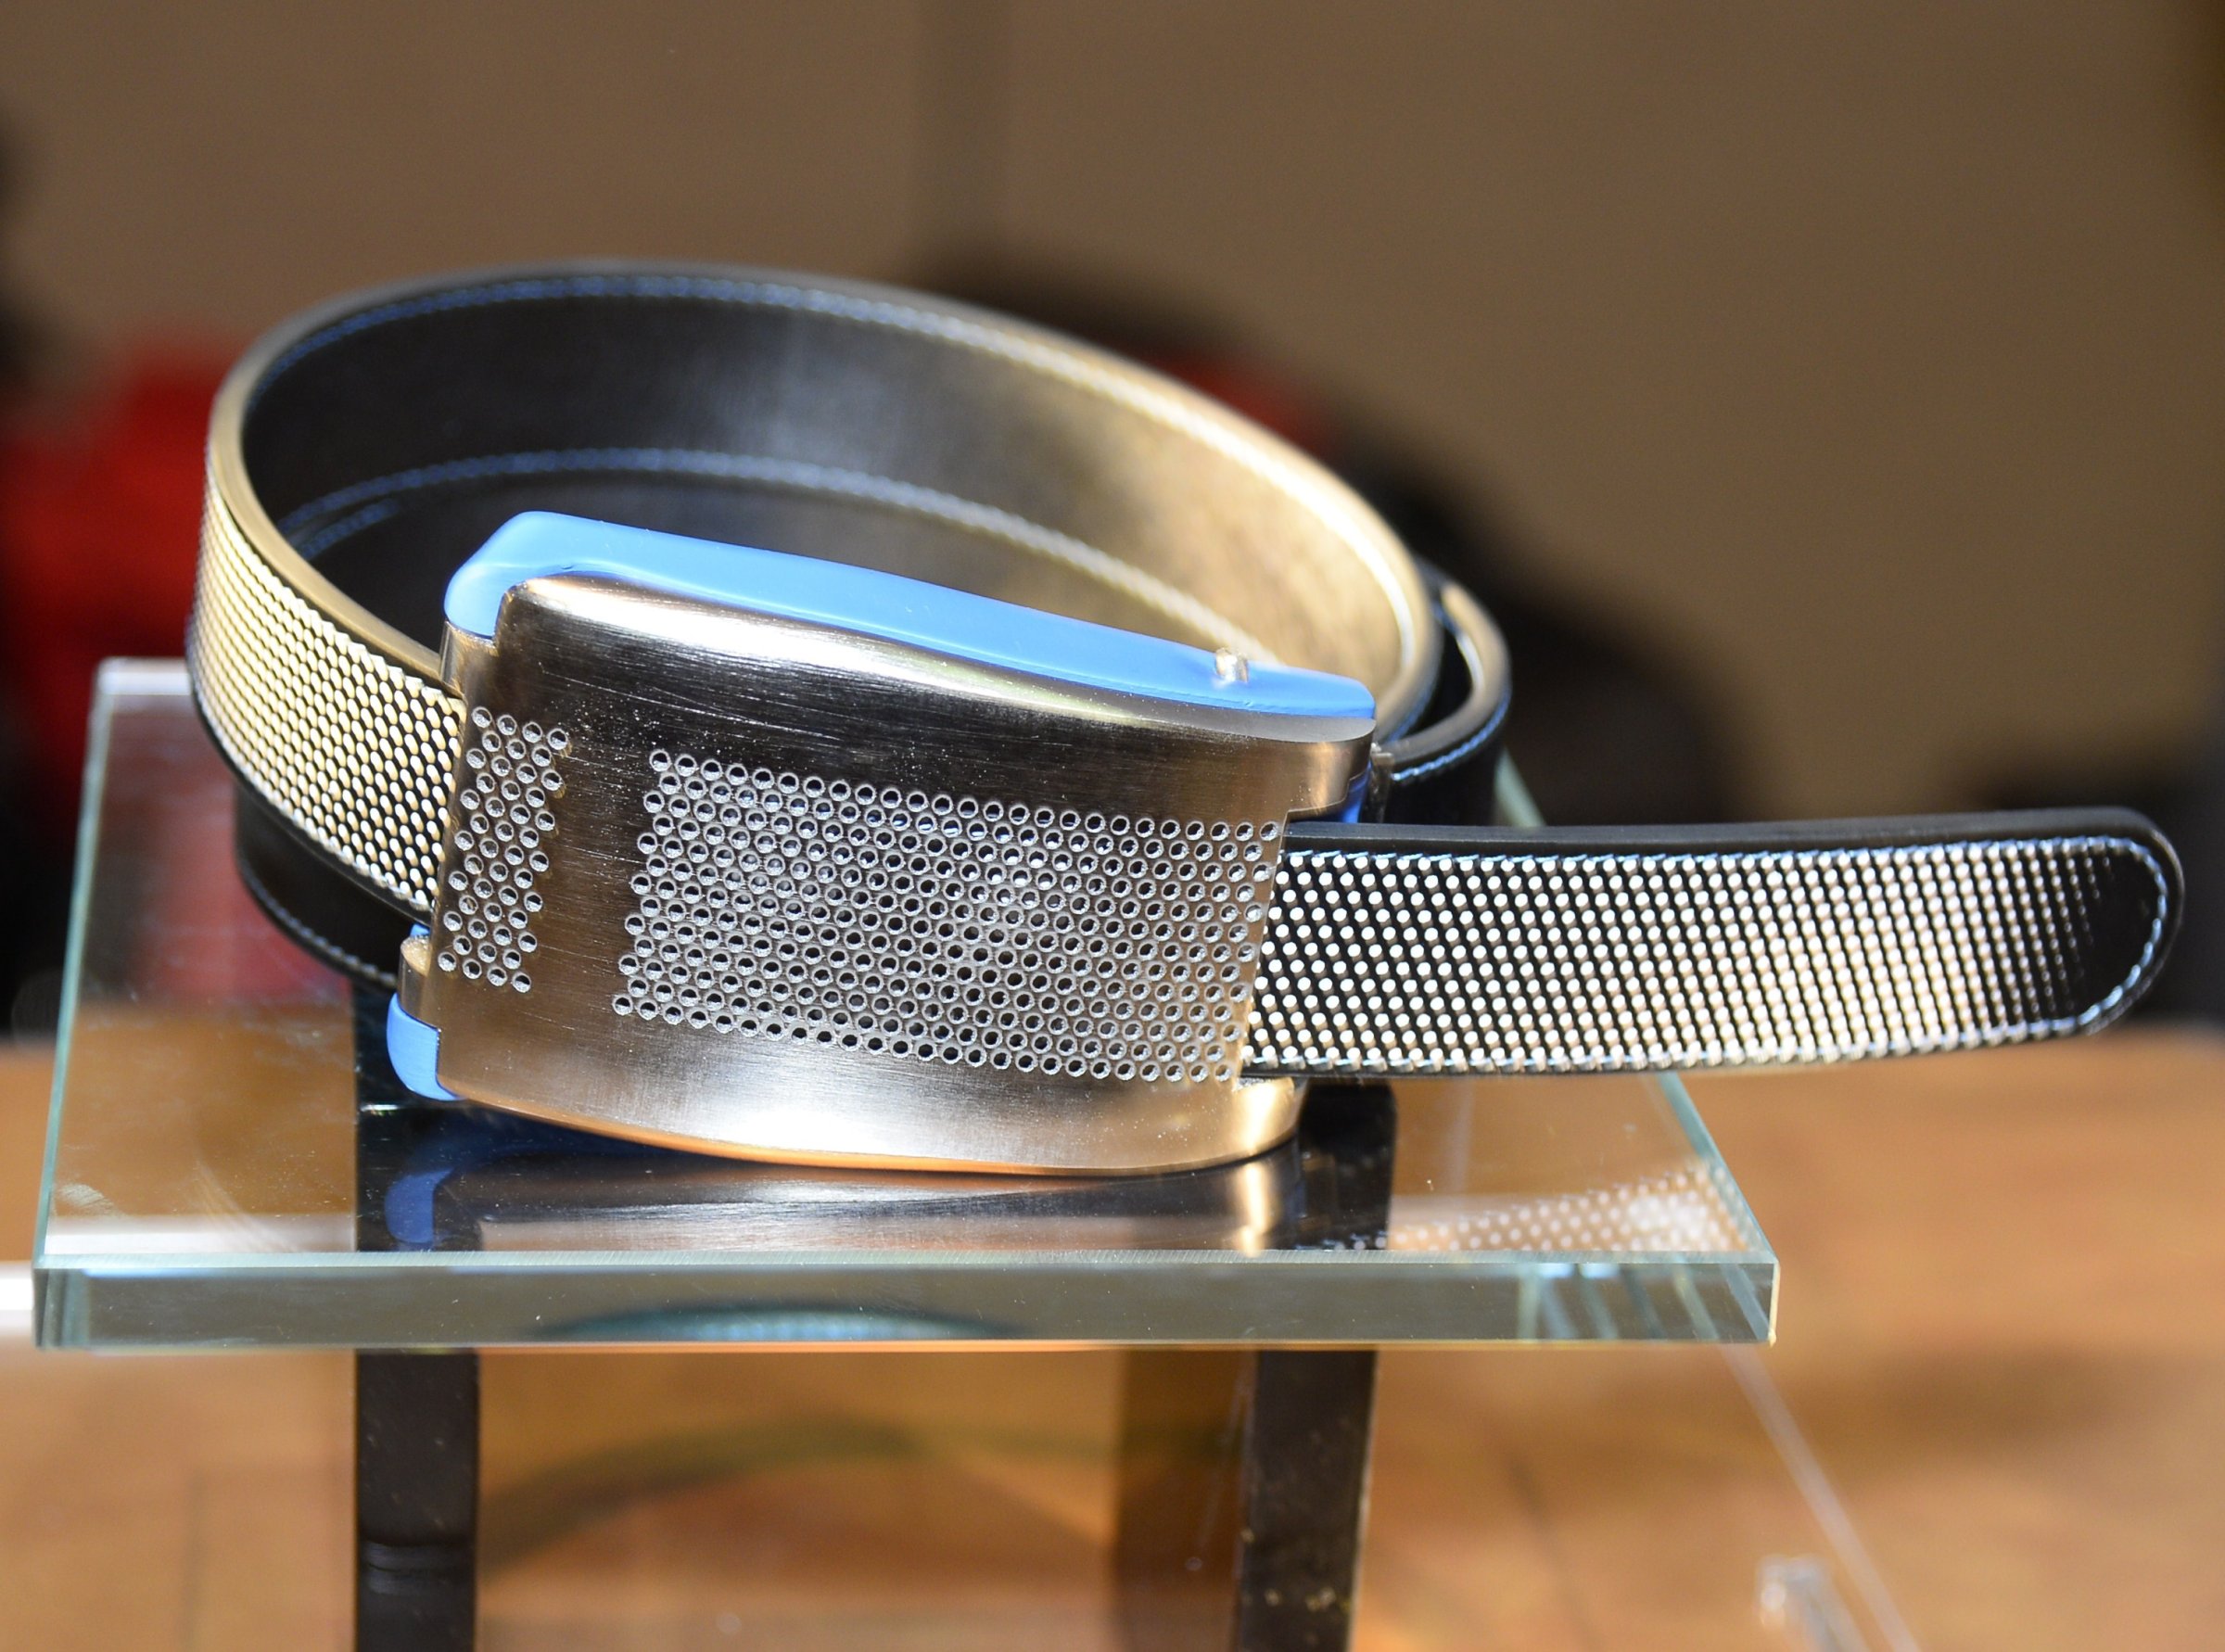 Belty, a smart belt from Paris-based Emiota, is displayed at the 2015 Consumer Electronics Show on Jan. 4, 2015 in Las Vegas, Nevada.